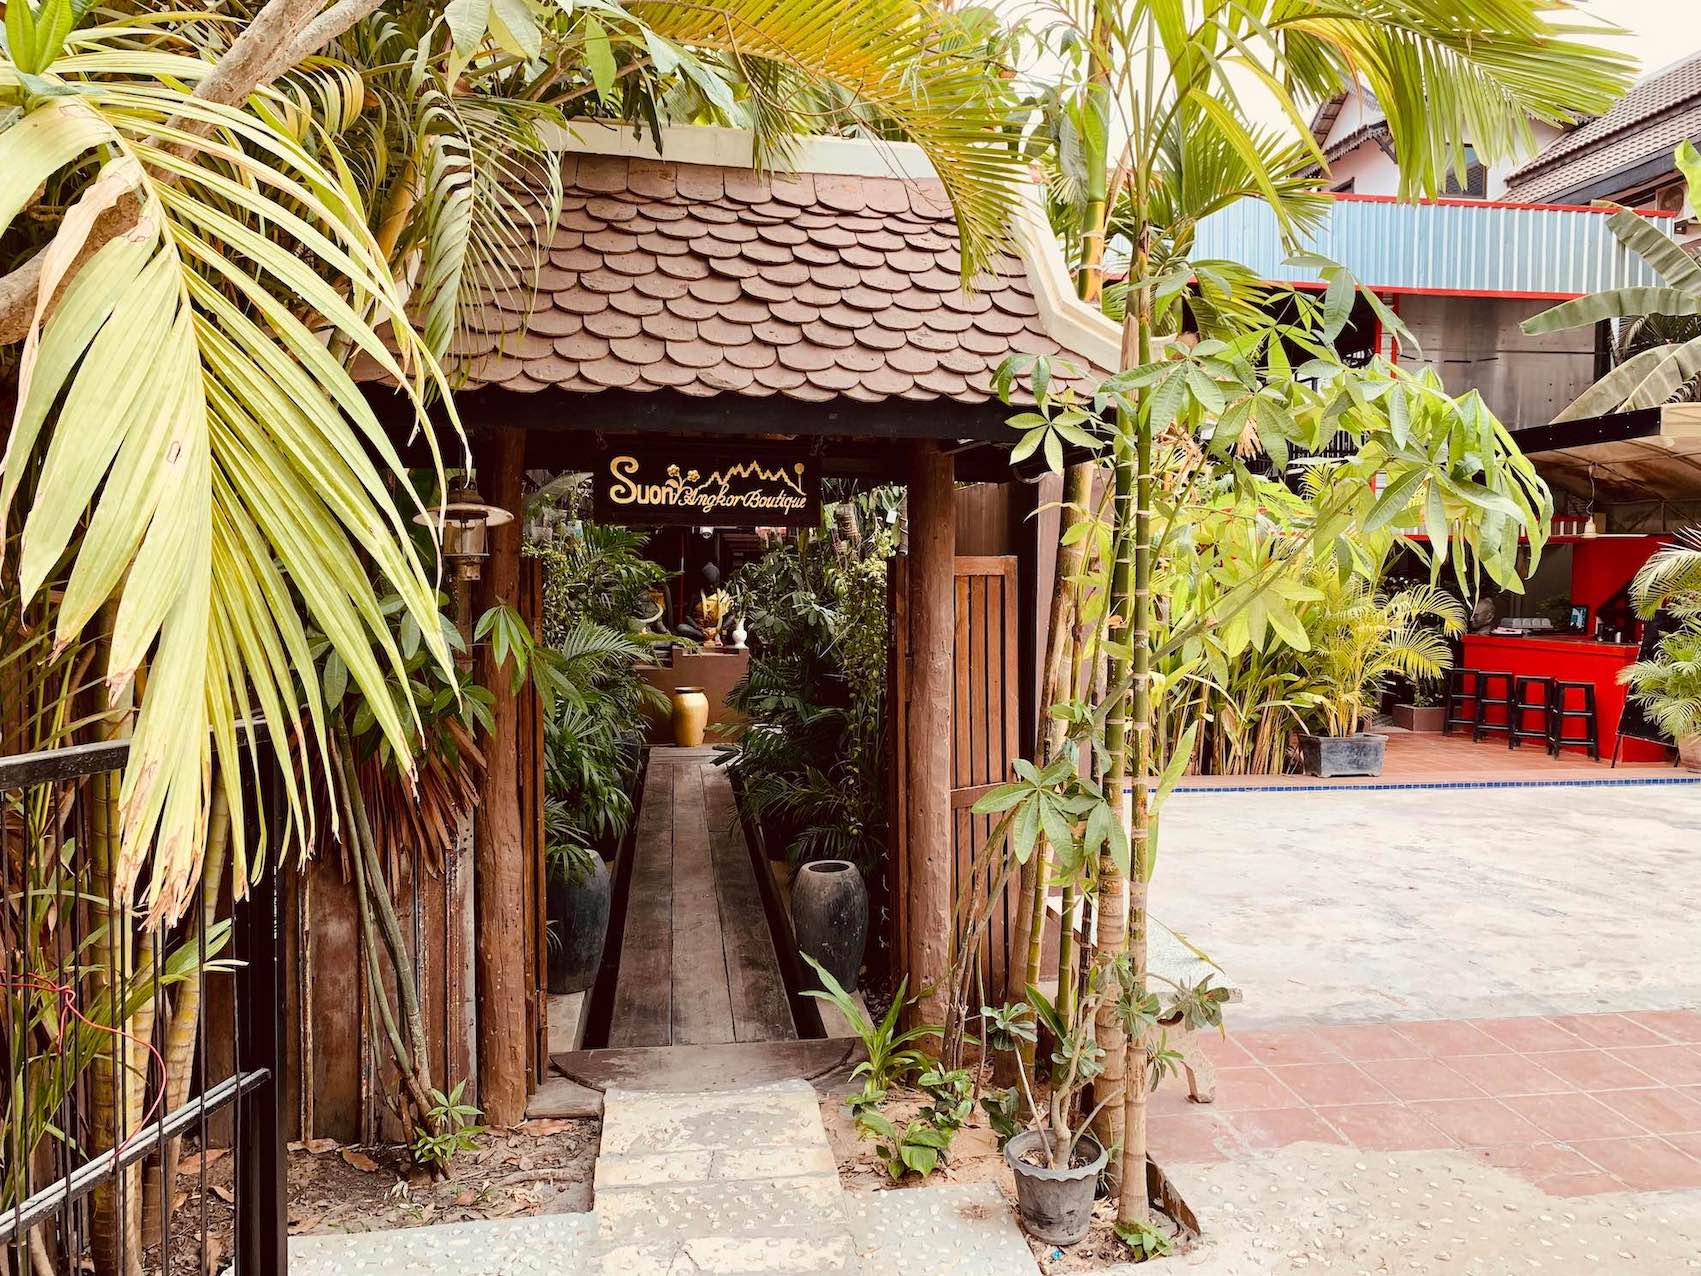 Remembering our stay at Suon Angkor Boutique Hotel